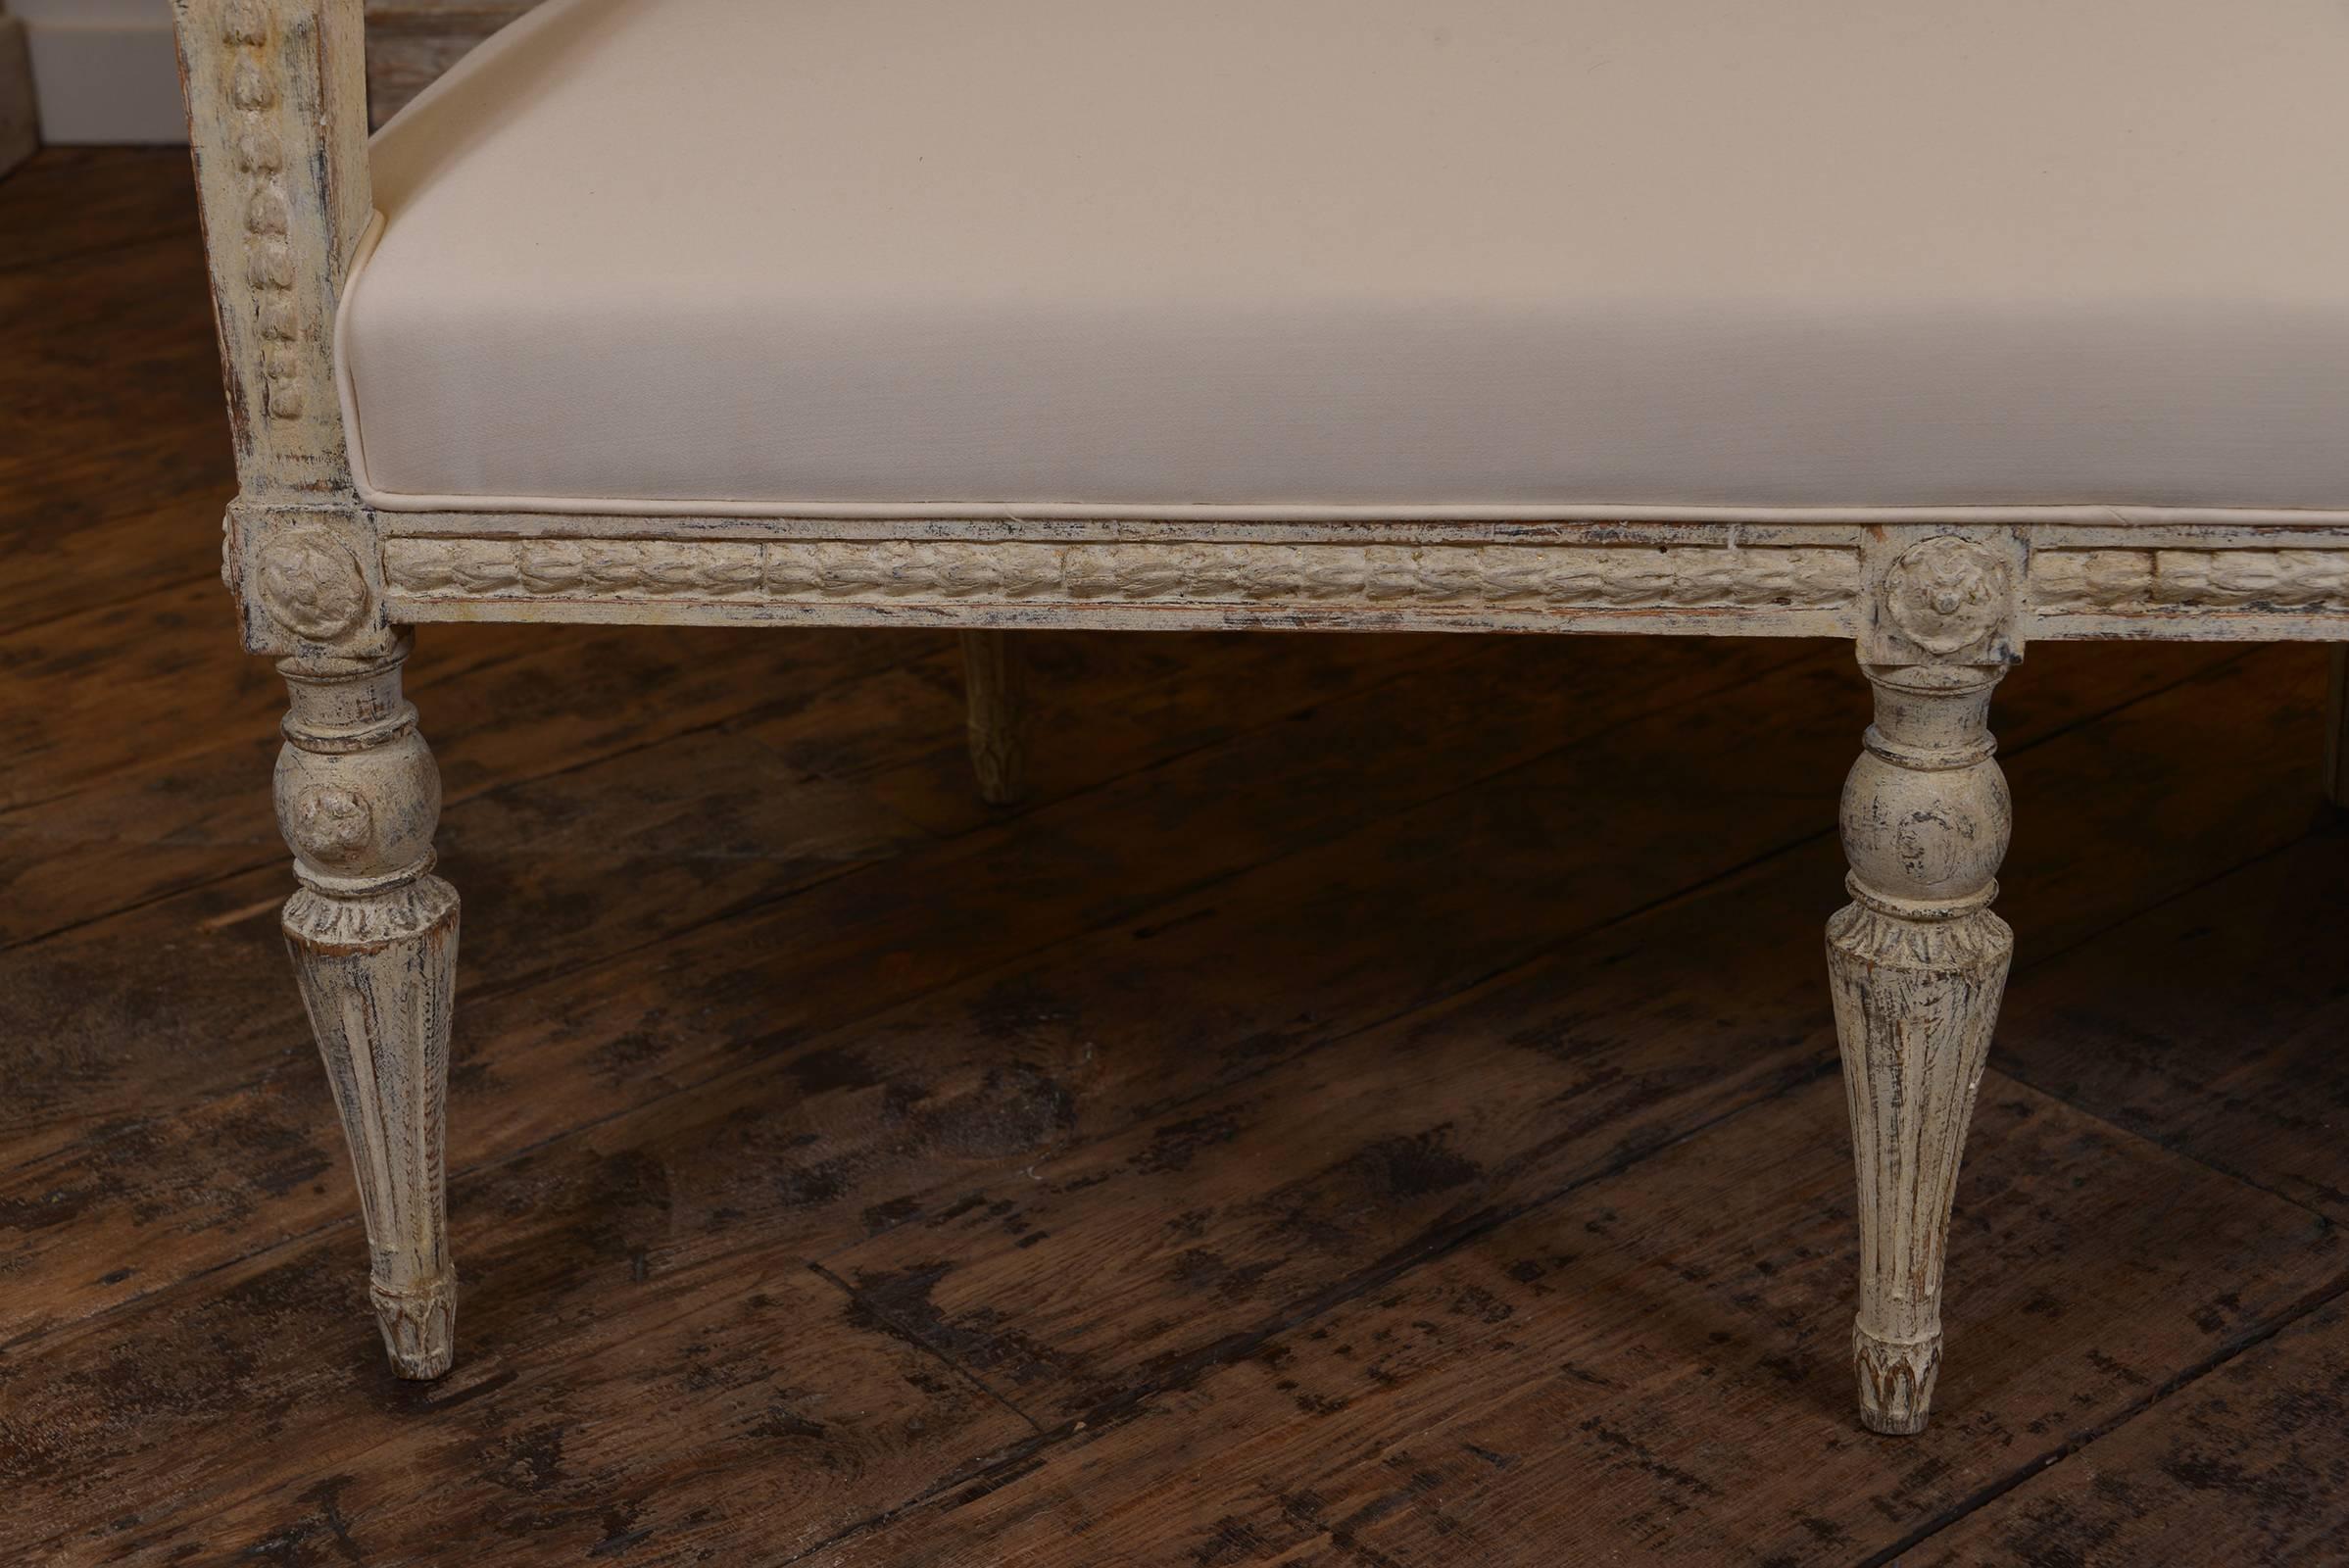 Swedish Gustavian bench circa 1810 upholstered in Holland and Sherry wool, scraped paint finish. A special piece that could float in the room, as the back is as beautiful as the front.